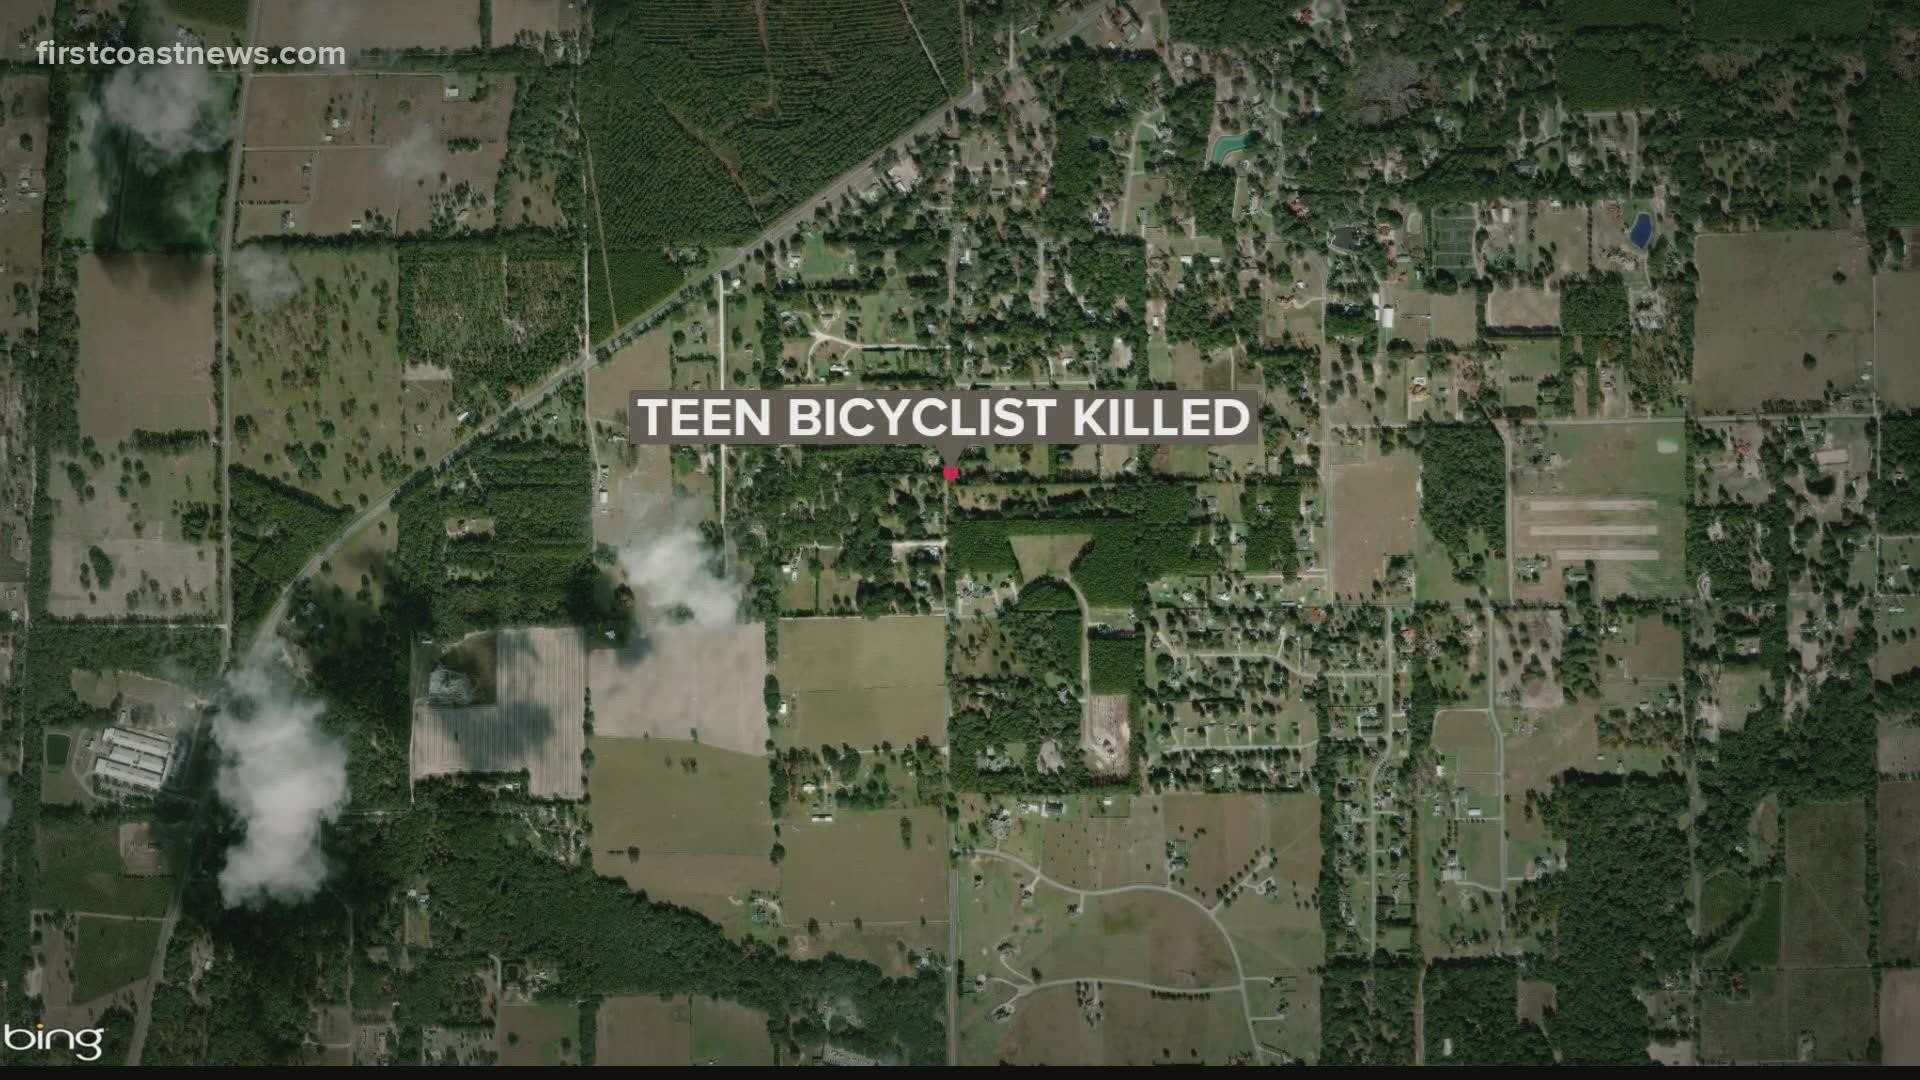 18 Years Boy And Girls Xxx Video - 15-year-old bicyclist killed after being hit by car | firstcoastnews.com